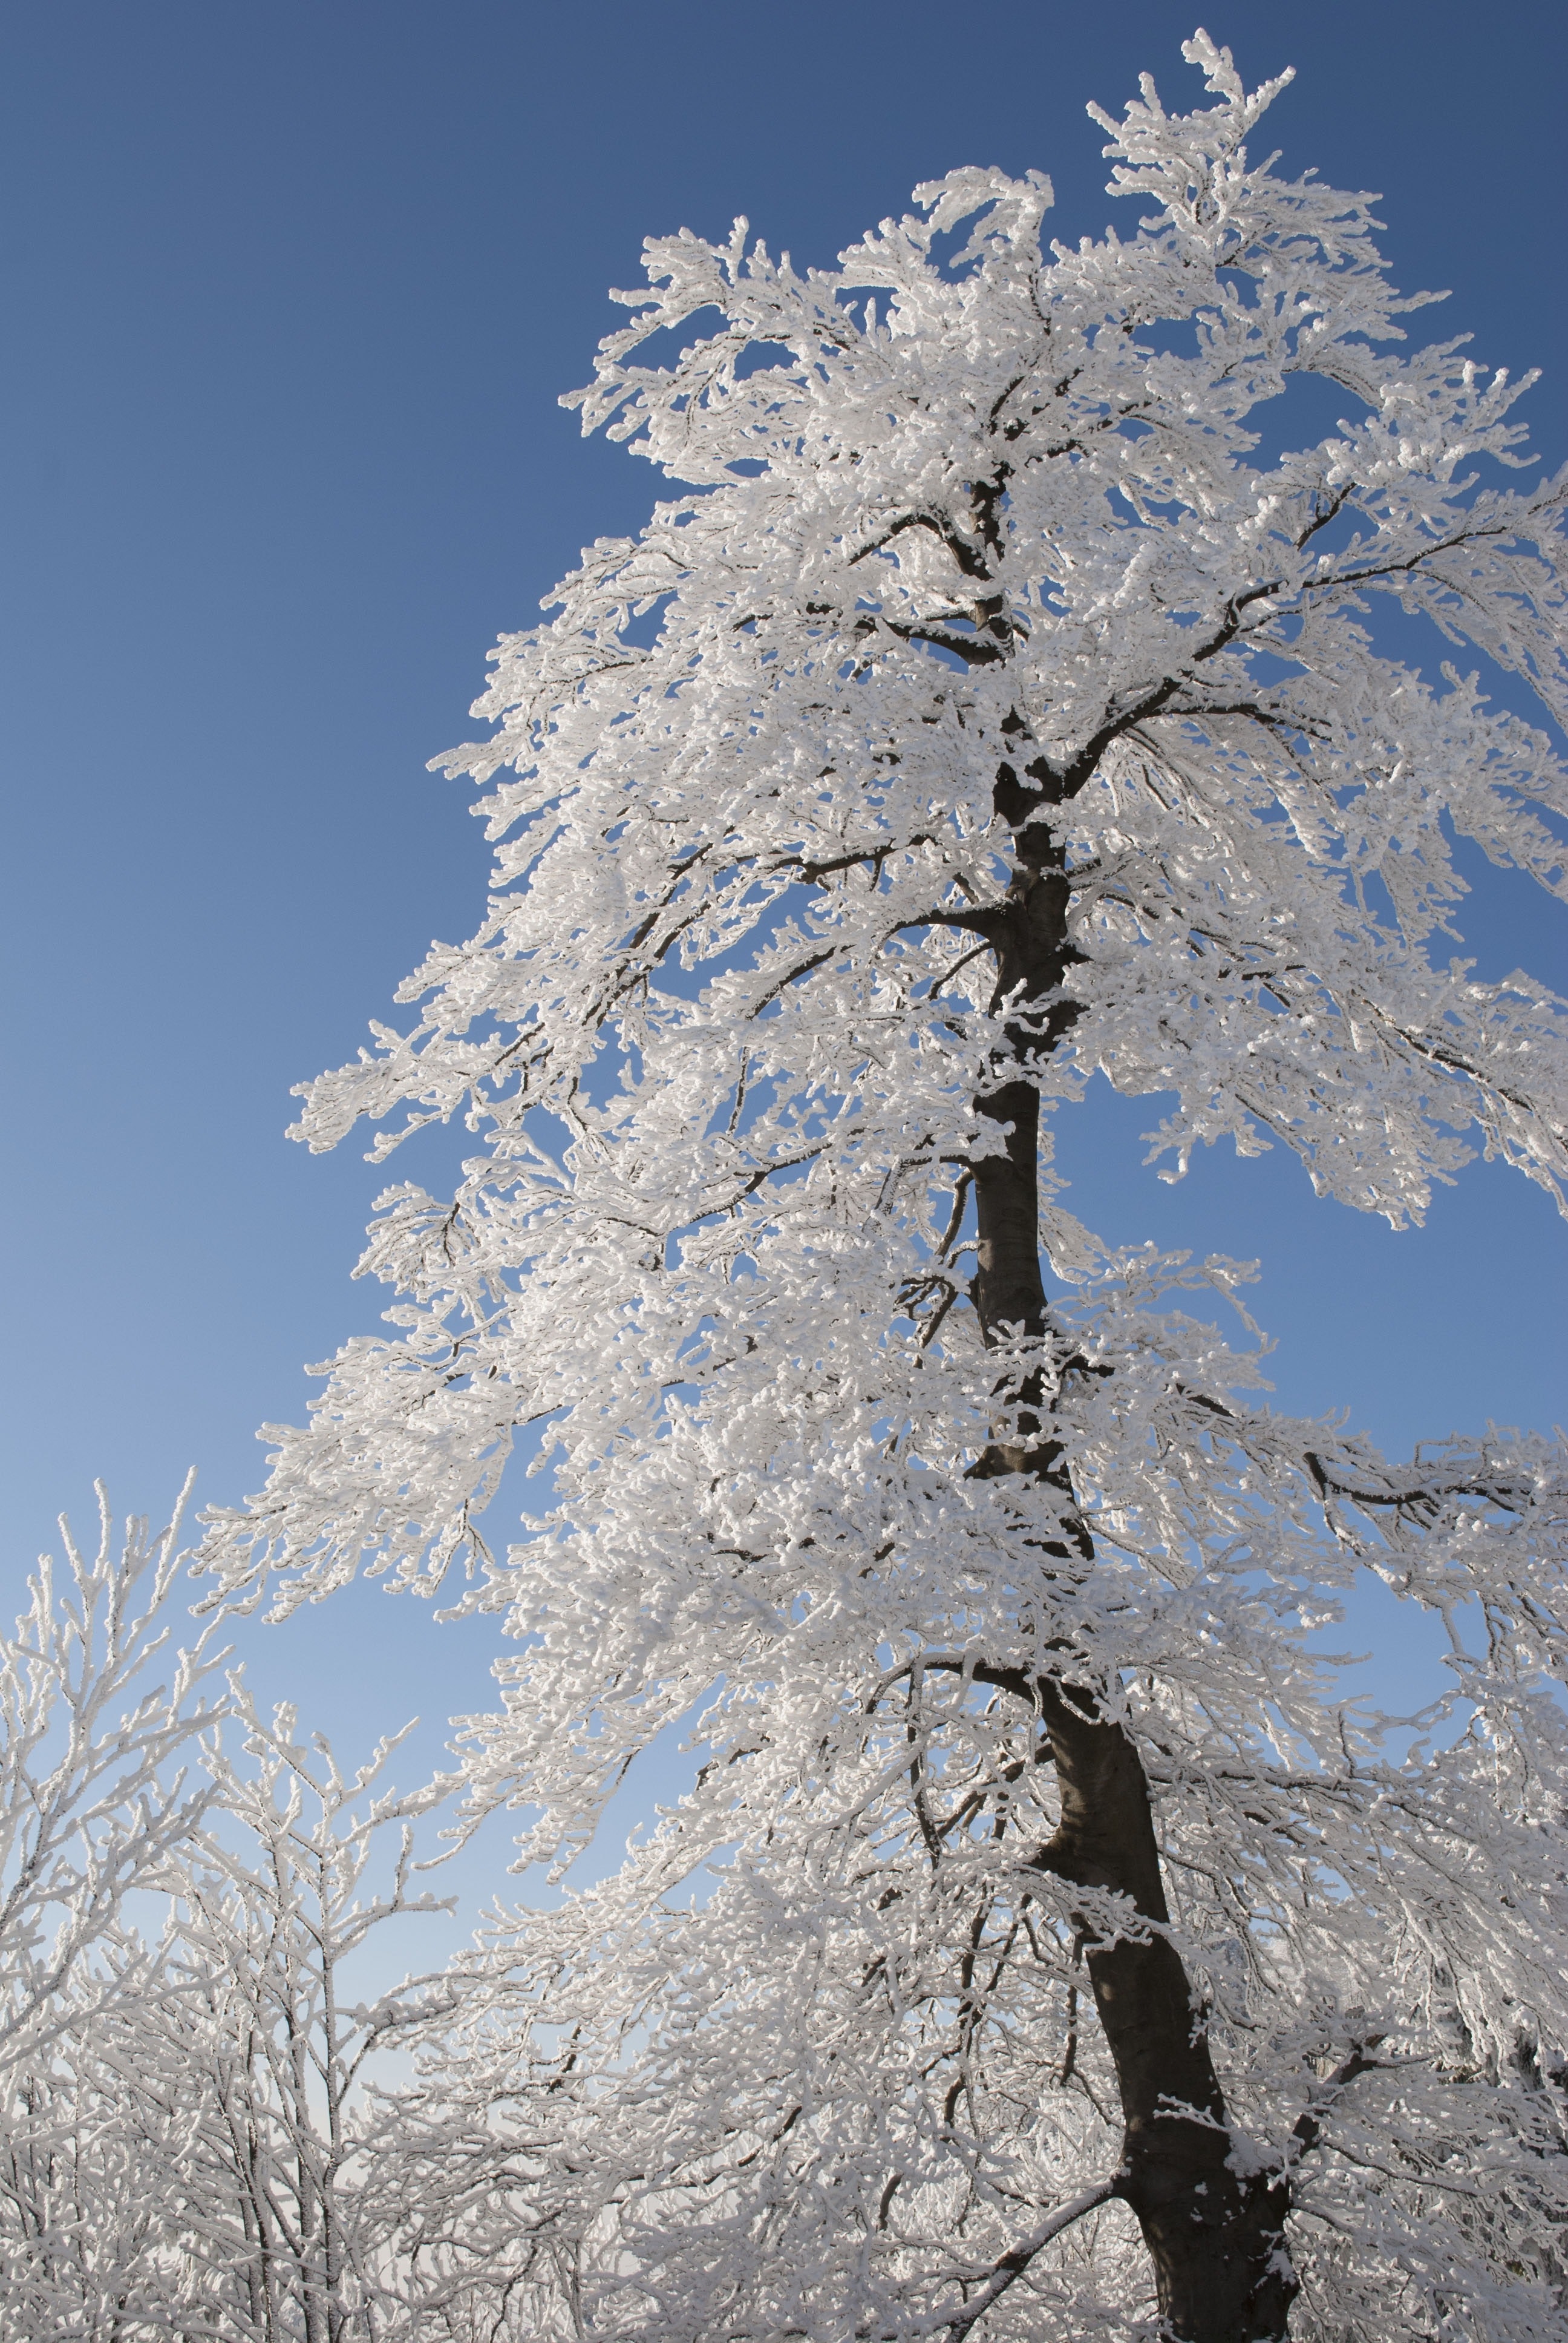 Snow covered tree under blue cloudy sky during daytime photo